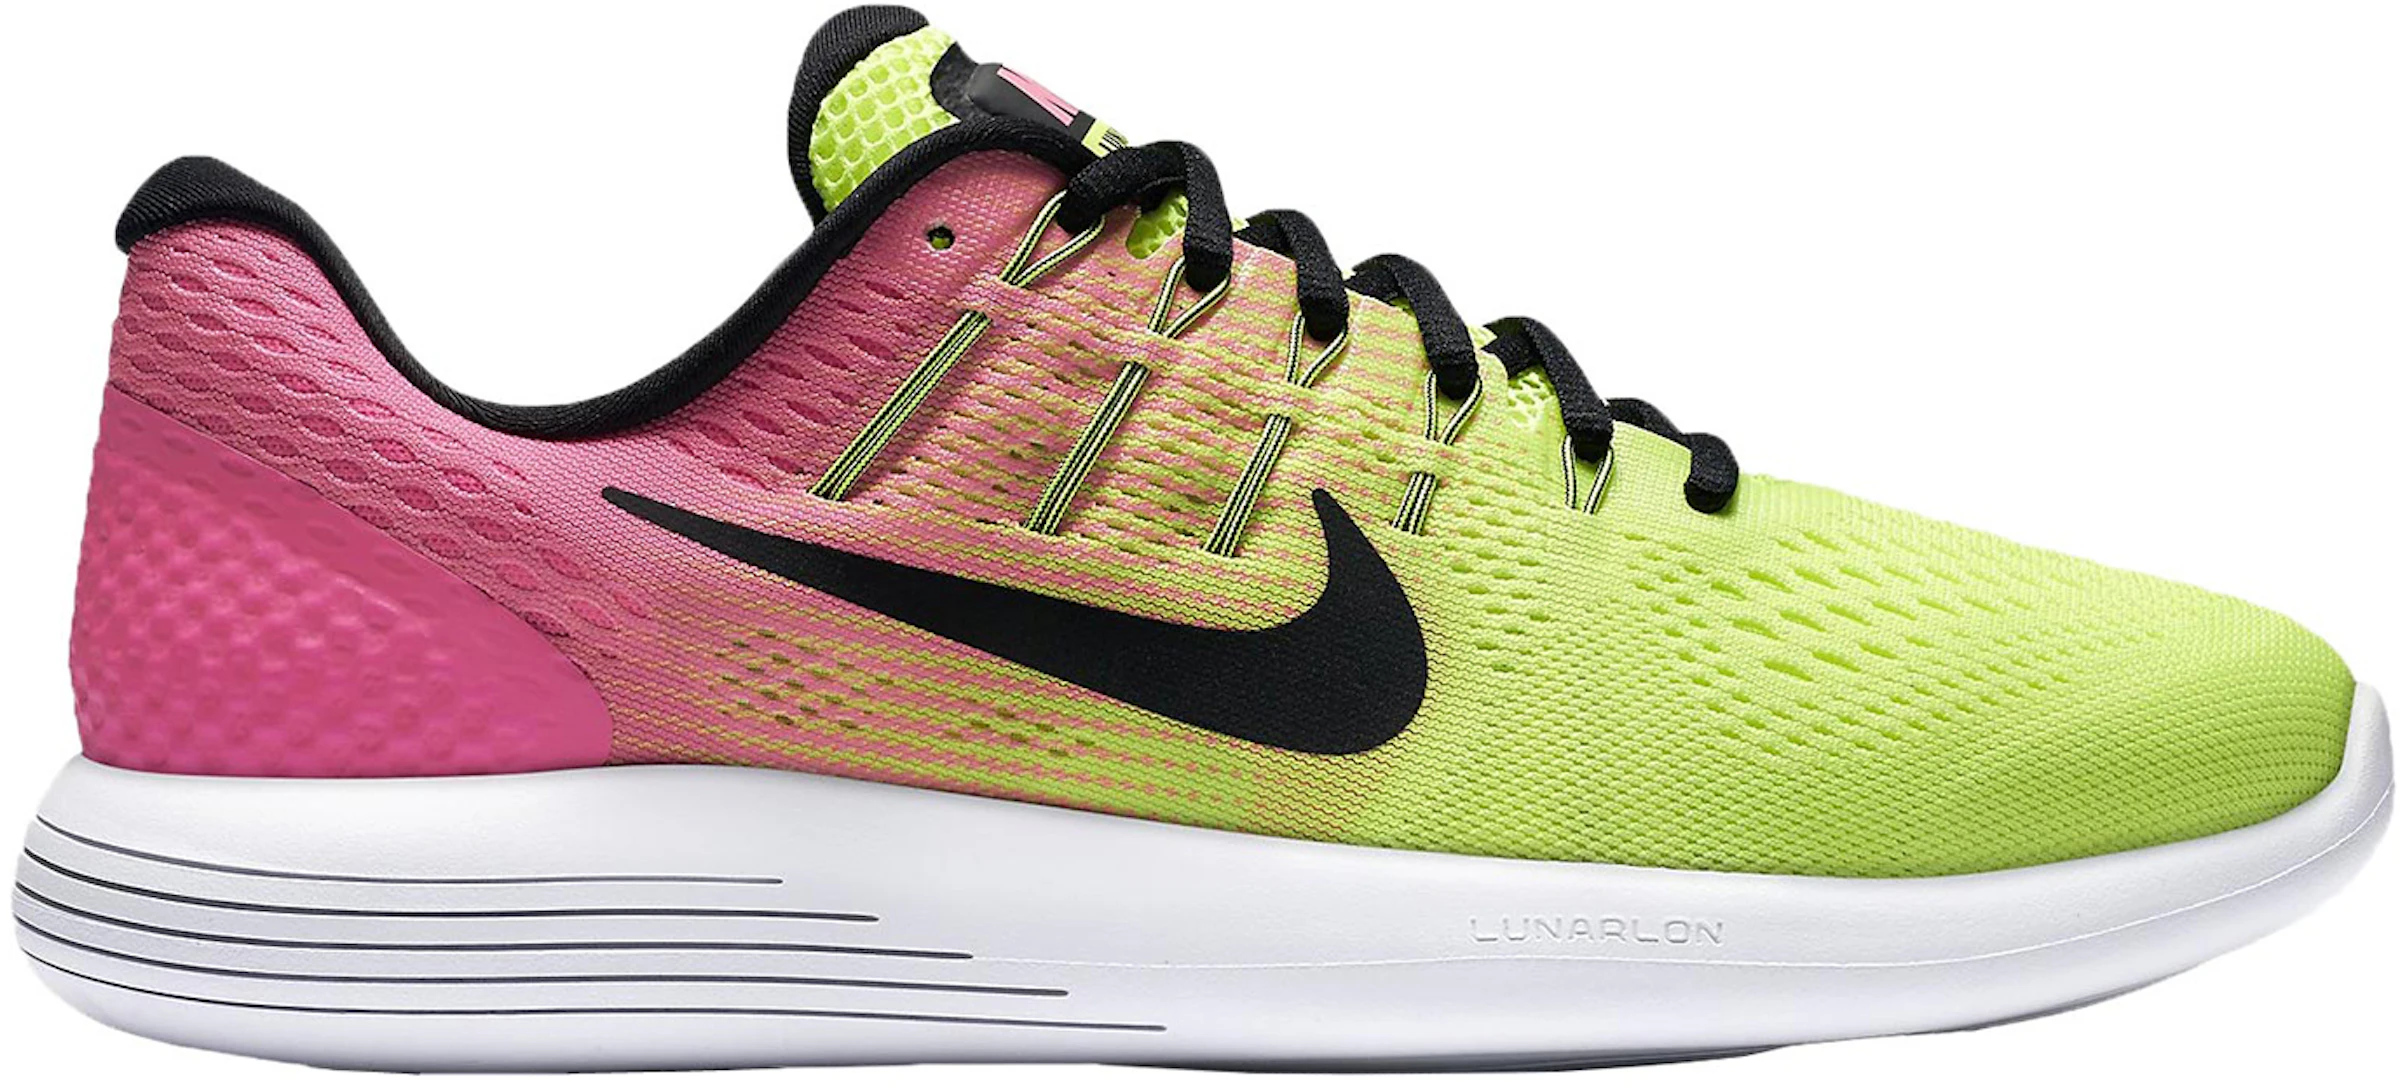 Nike Lunarglide OC Unlimited Olympic Collection - 844632-999 - ES